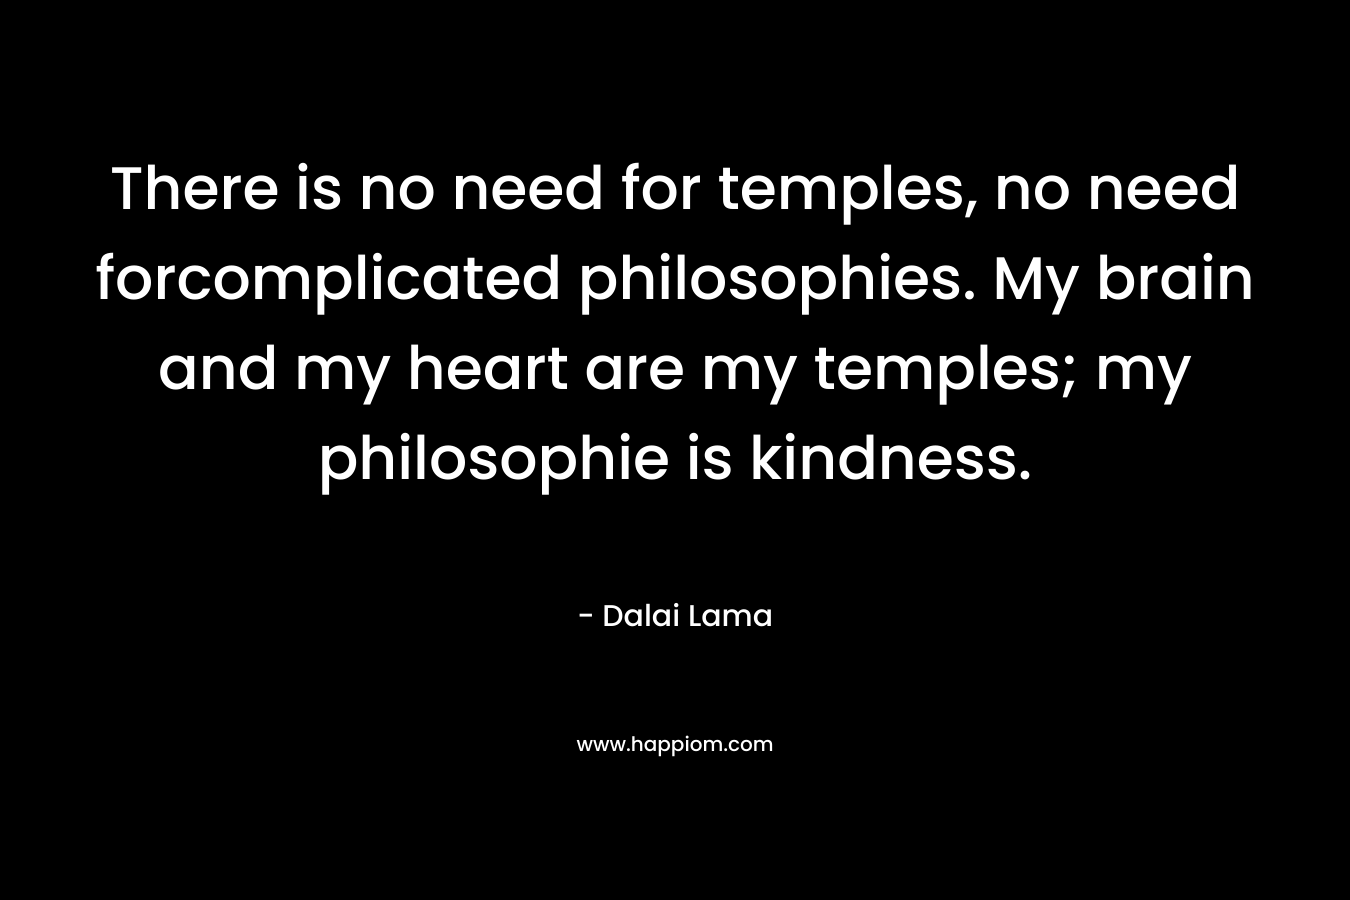 There is no need for temples, no need forcomplicated philosophies. My brain and my heart are my temples; my philosophie is kindness.